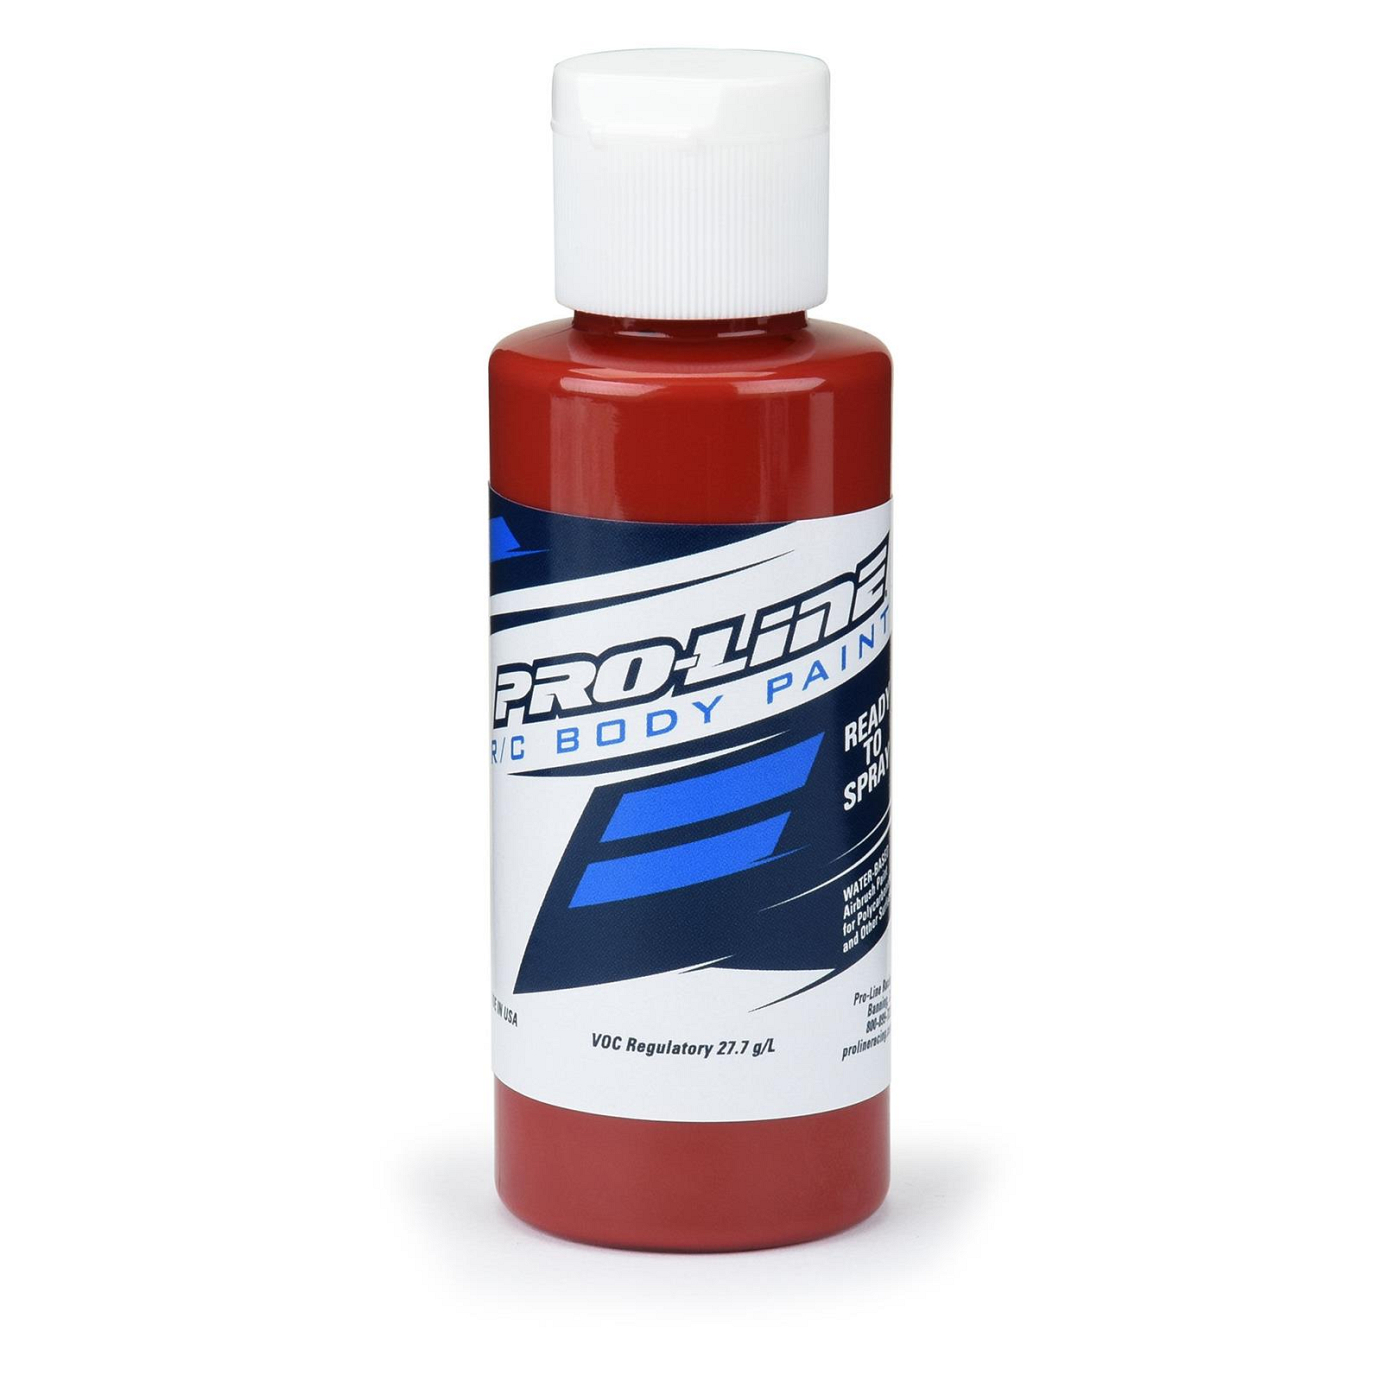 Proline RC Body Paint, Mars Red Oxide